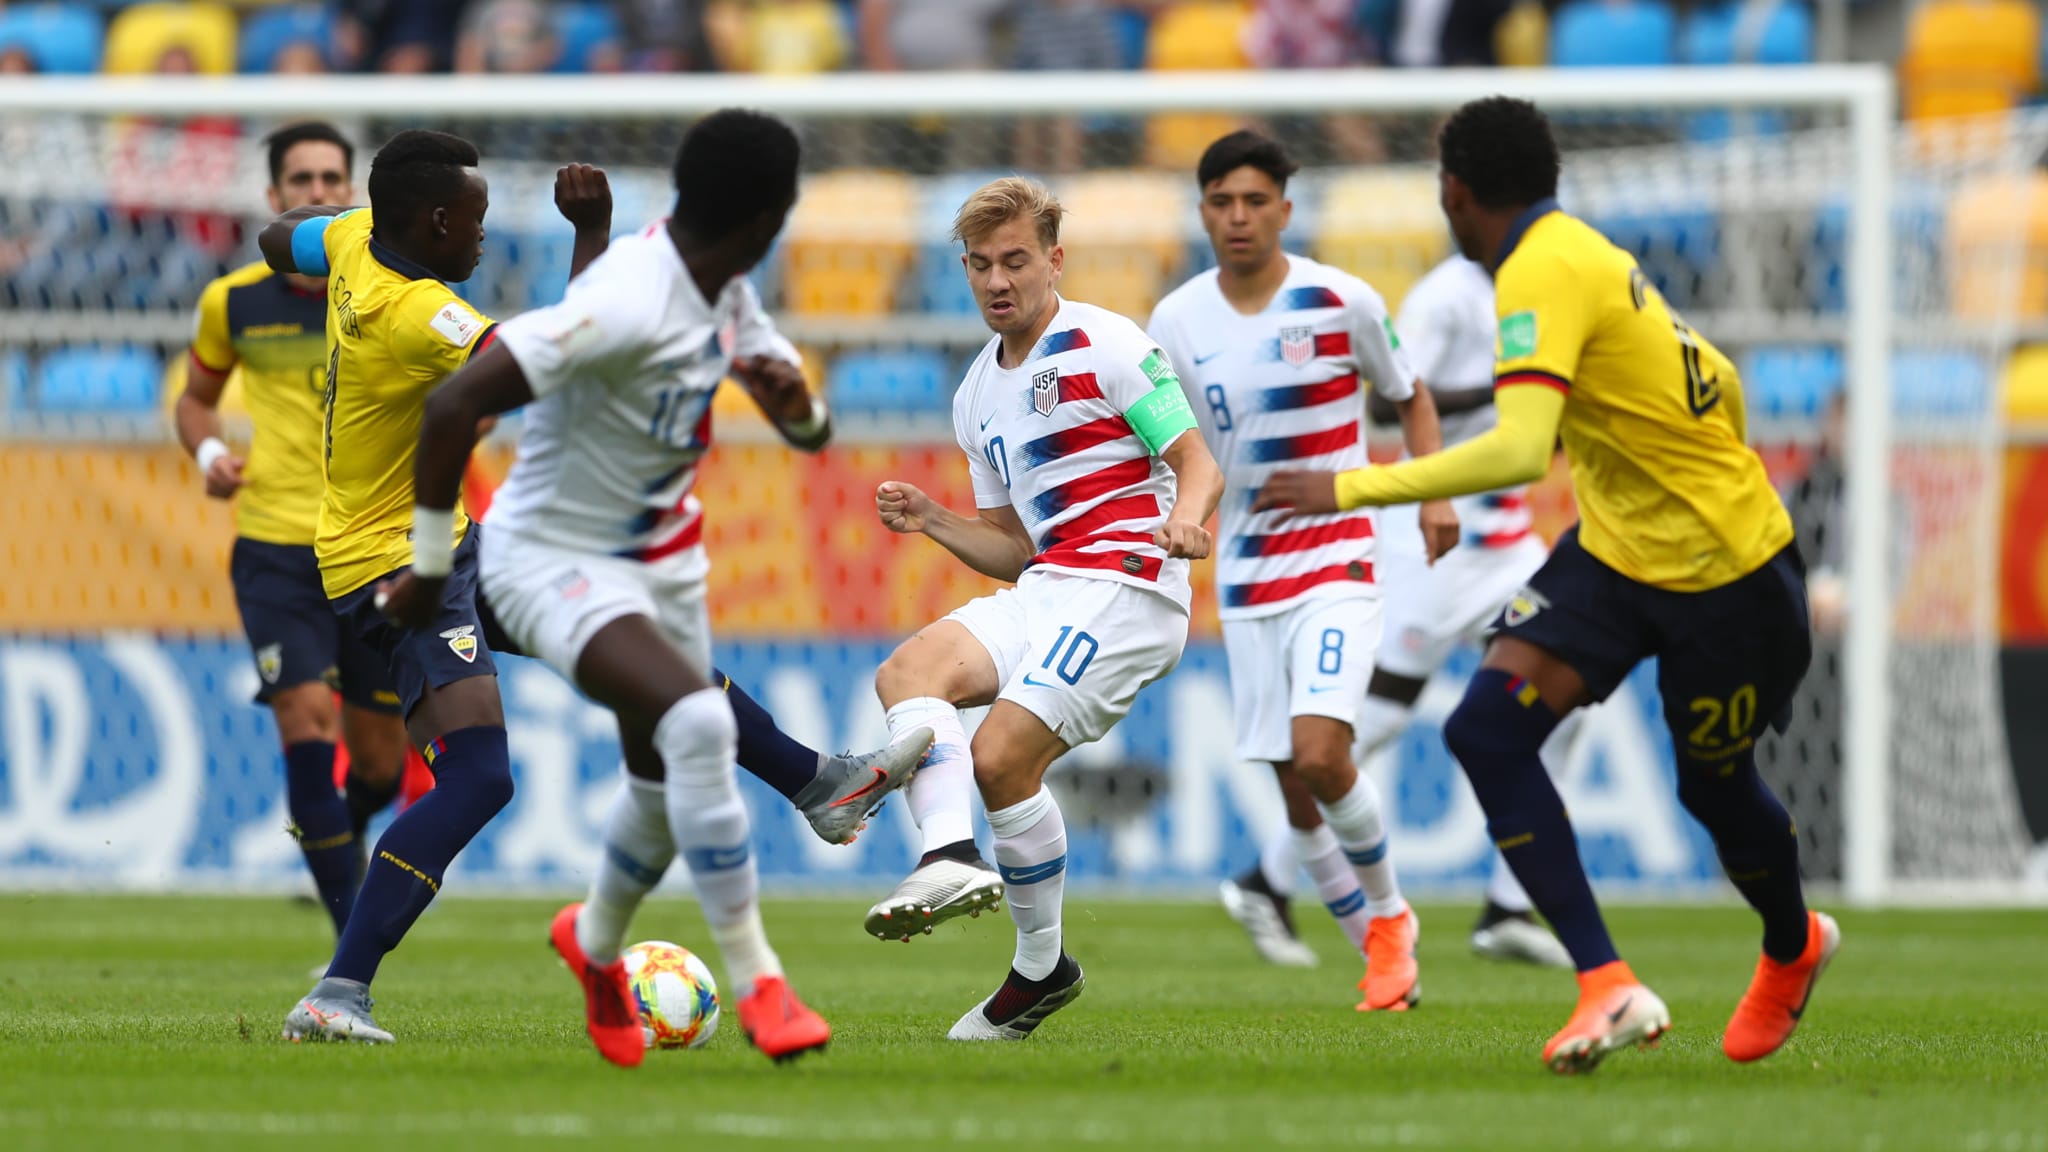 United States’ U20 World Cup ends with hardfought loss to Ecuador